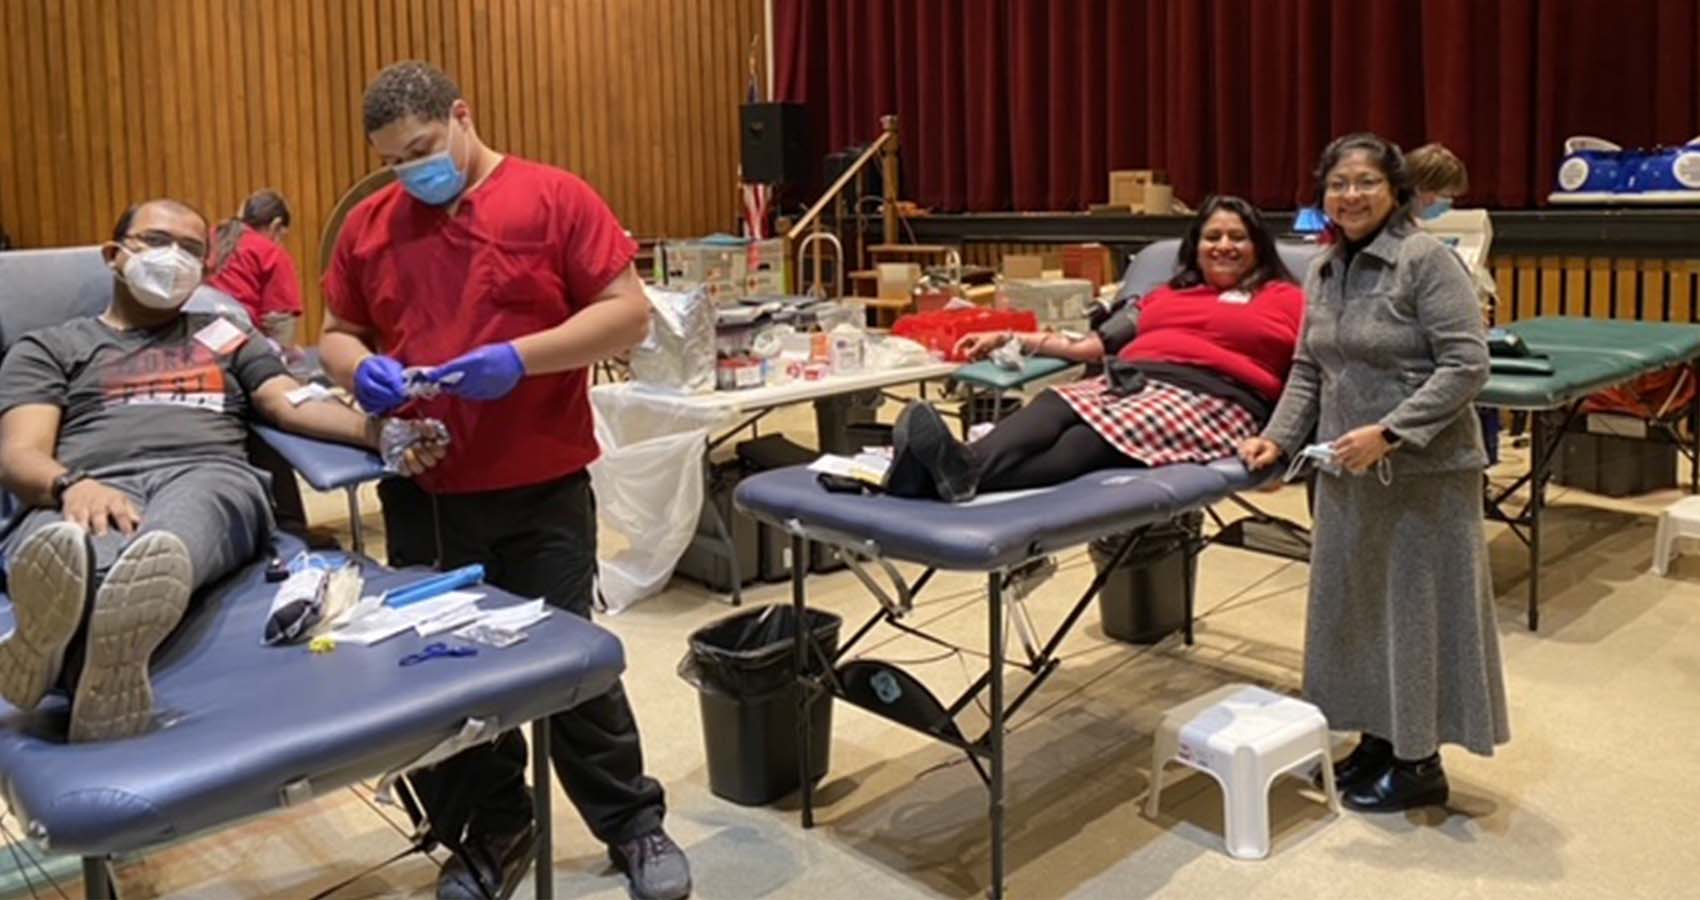 Northeastern Pennsylvania Chapter Of AAPI In Partnership With Red Cross Organizes Blood Drive